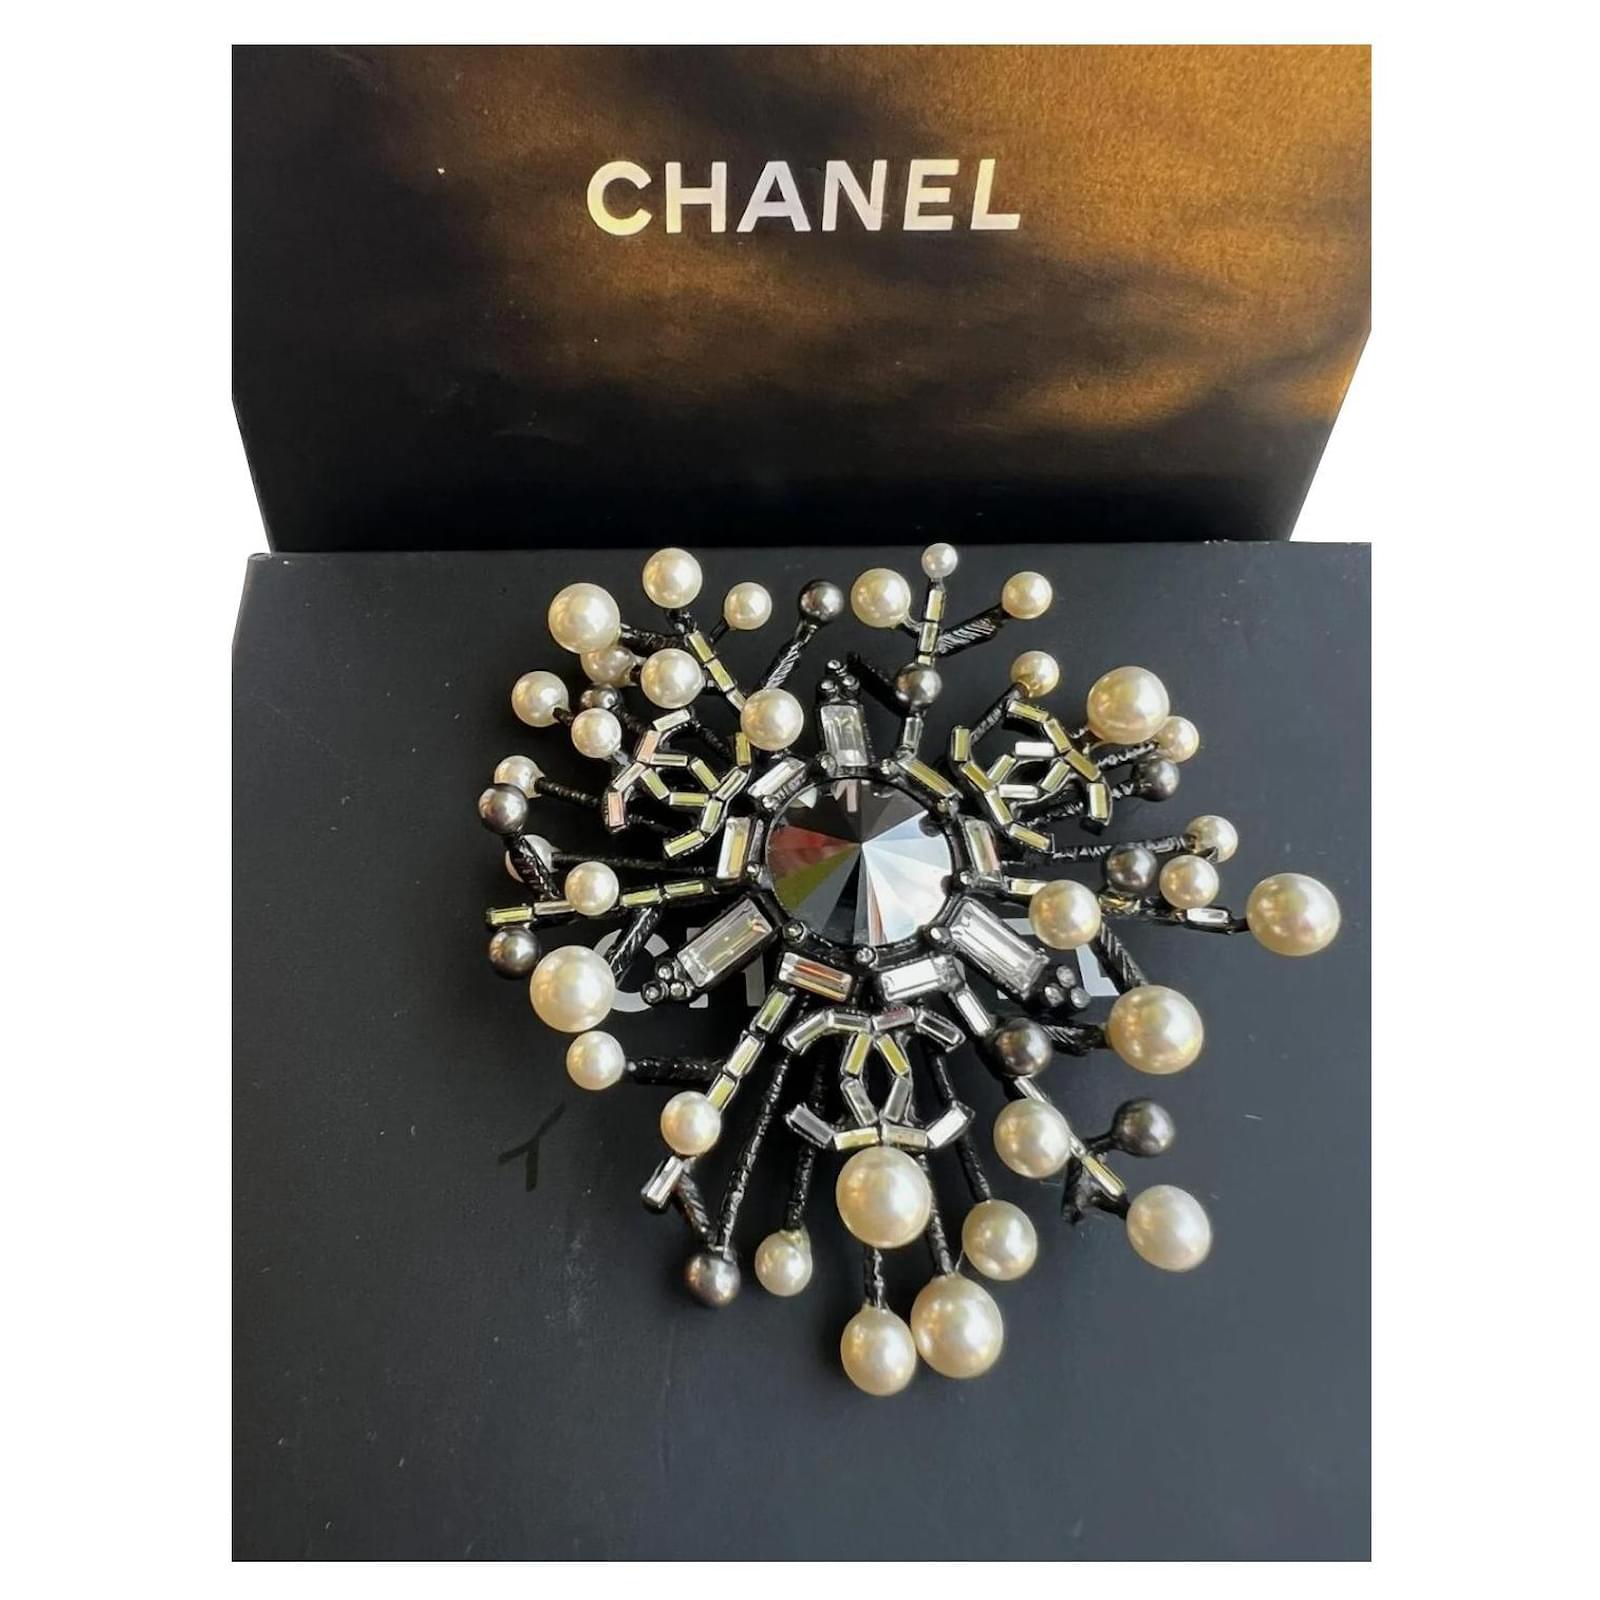 RESERVED - Chanel Logo Brooch Pearls 2014 Excellent Condition